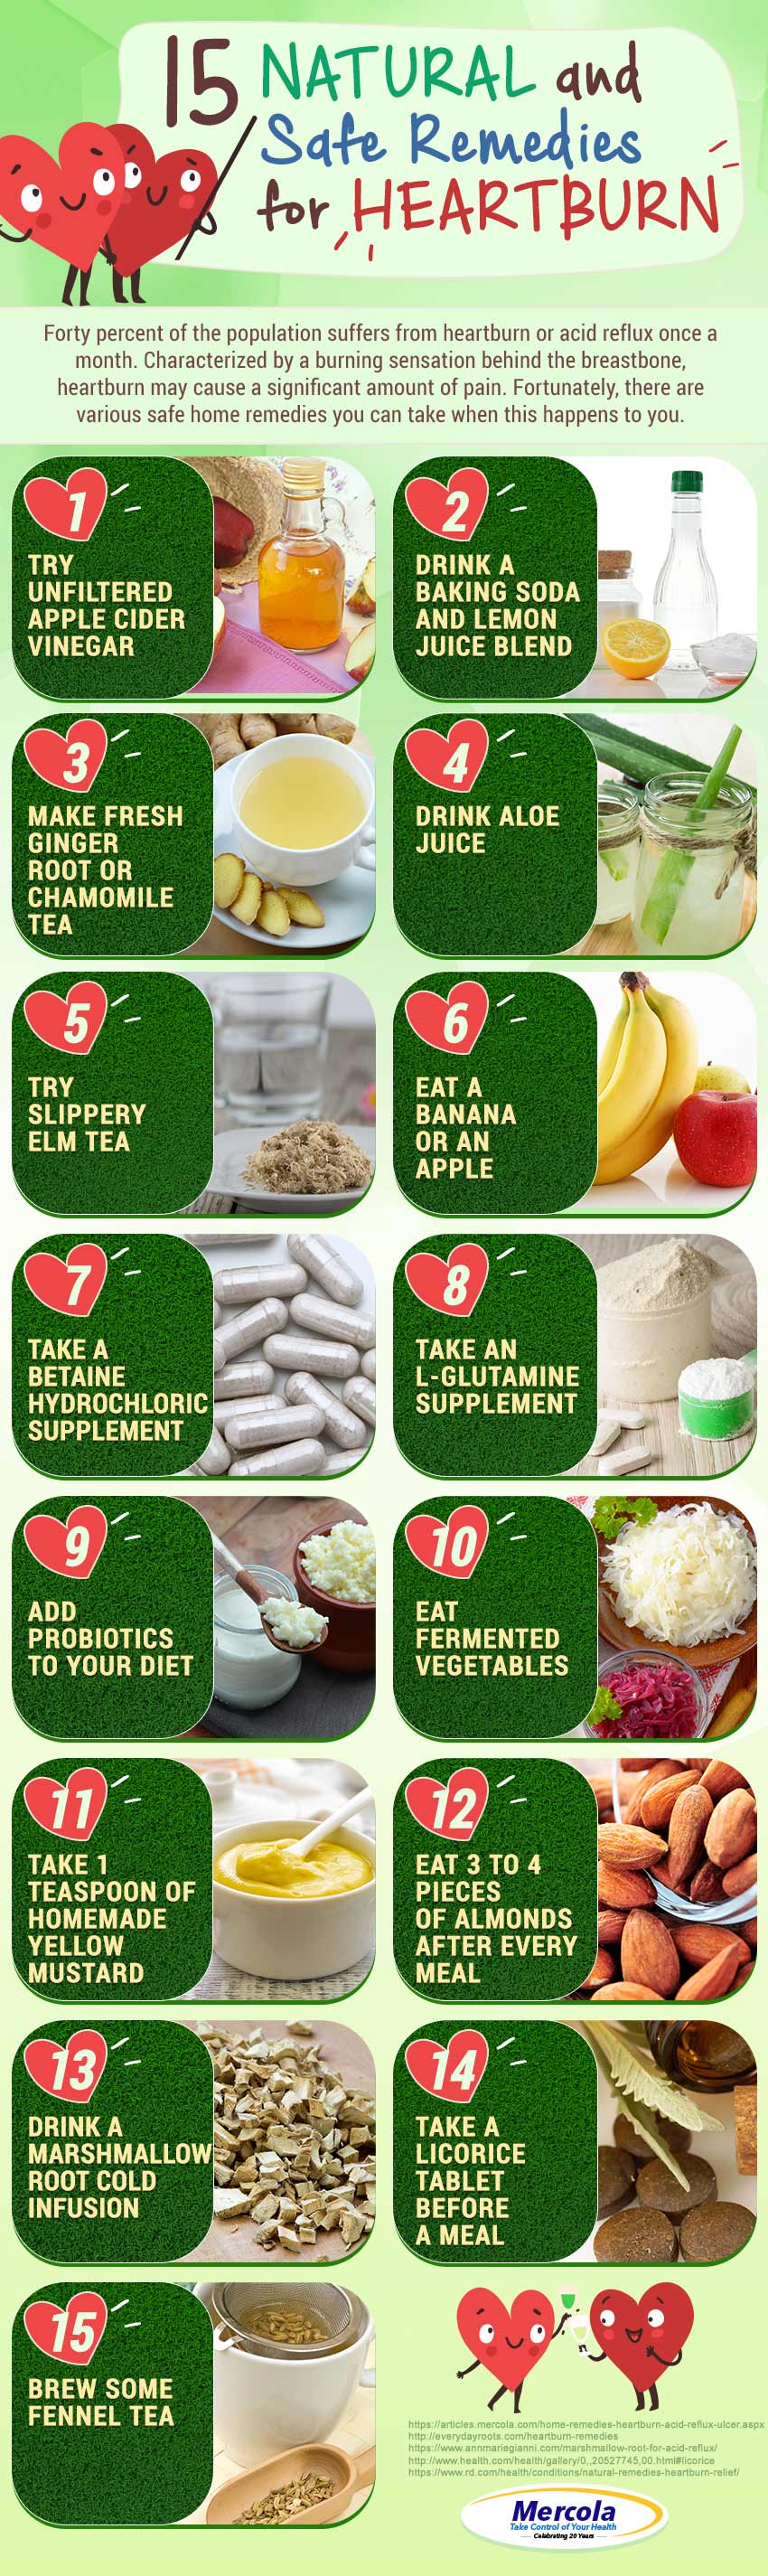 natural home remedies for heartburn, acid reflux and ulcers